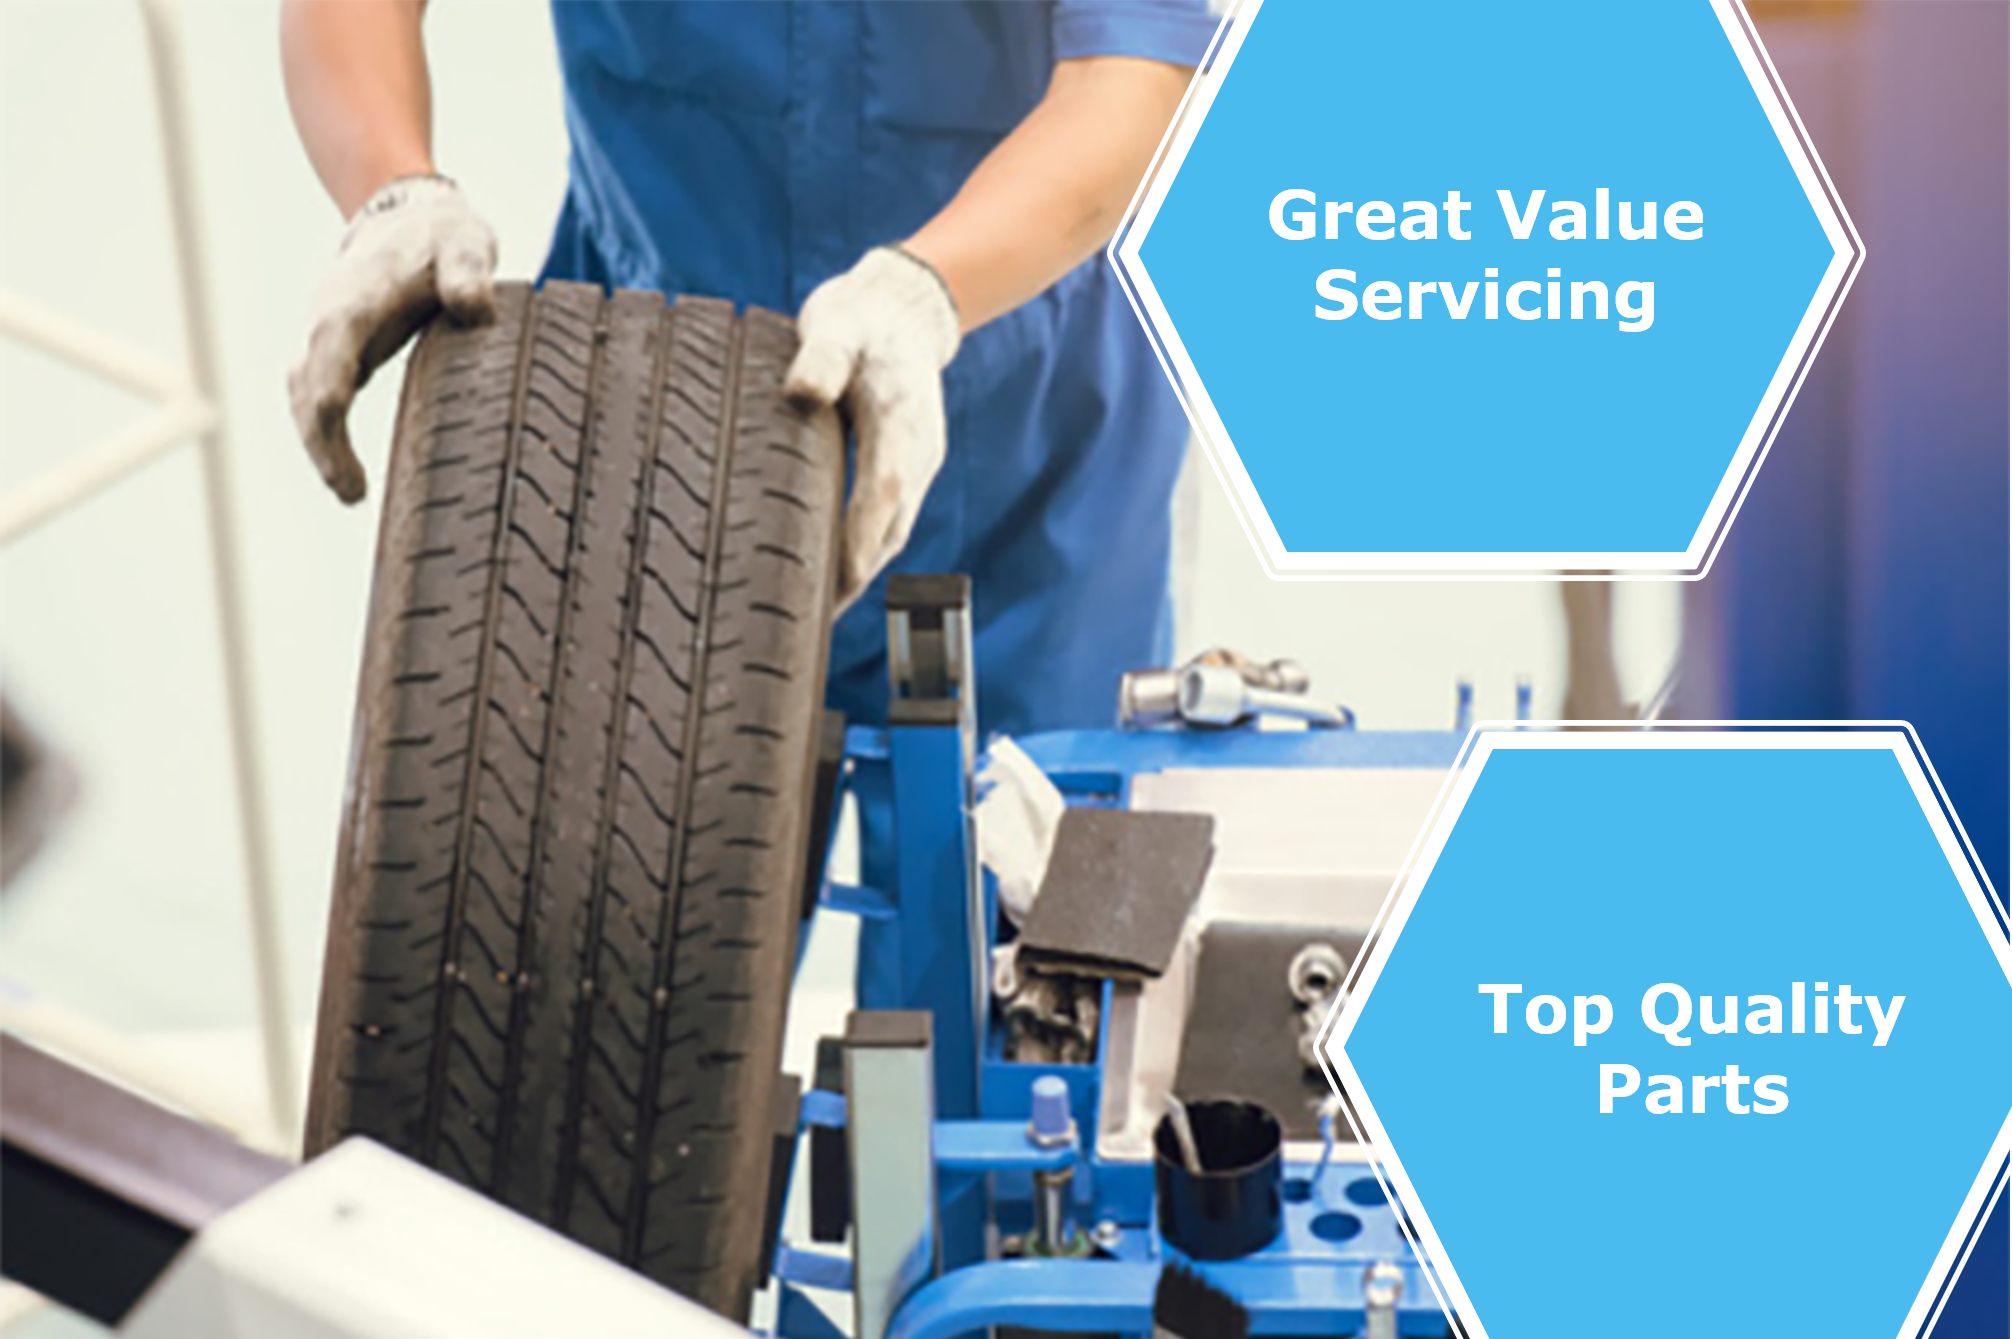 Vehicle servicing - great value servicing - top quality parts